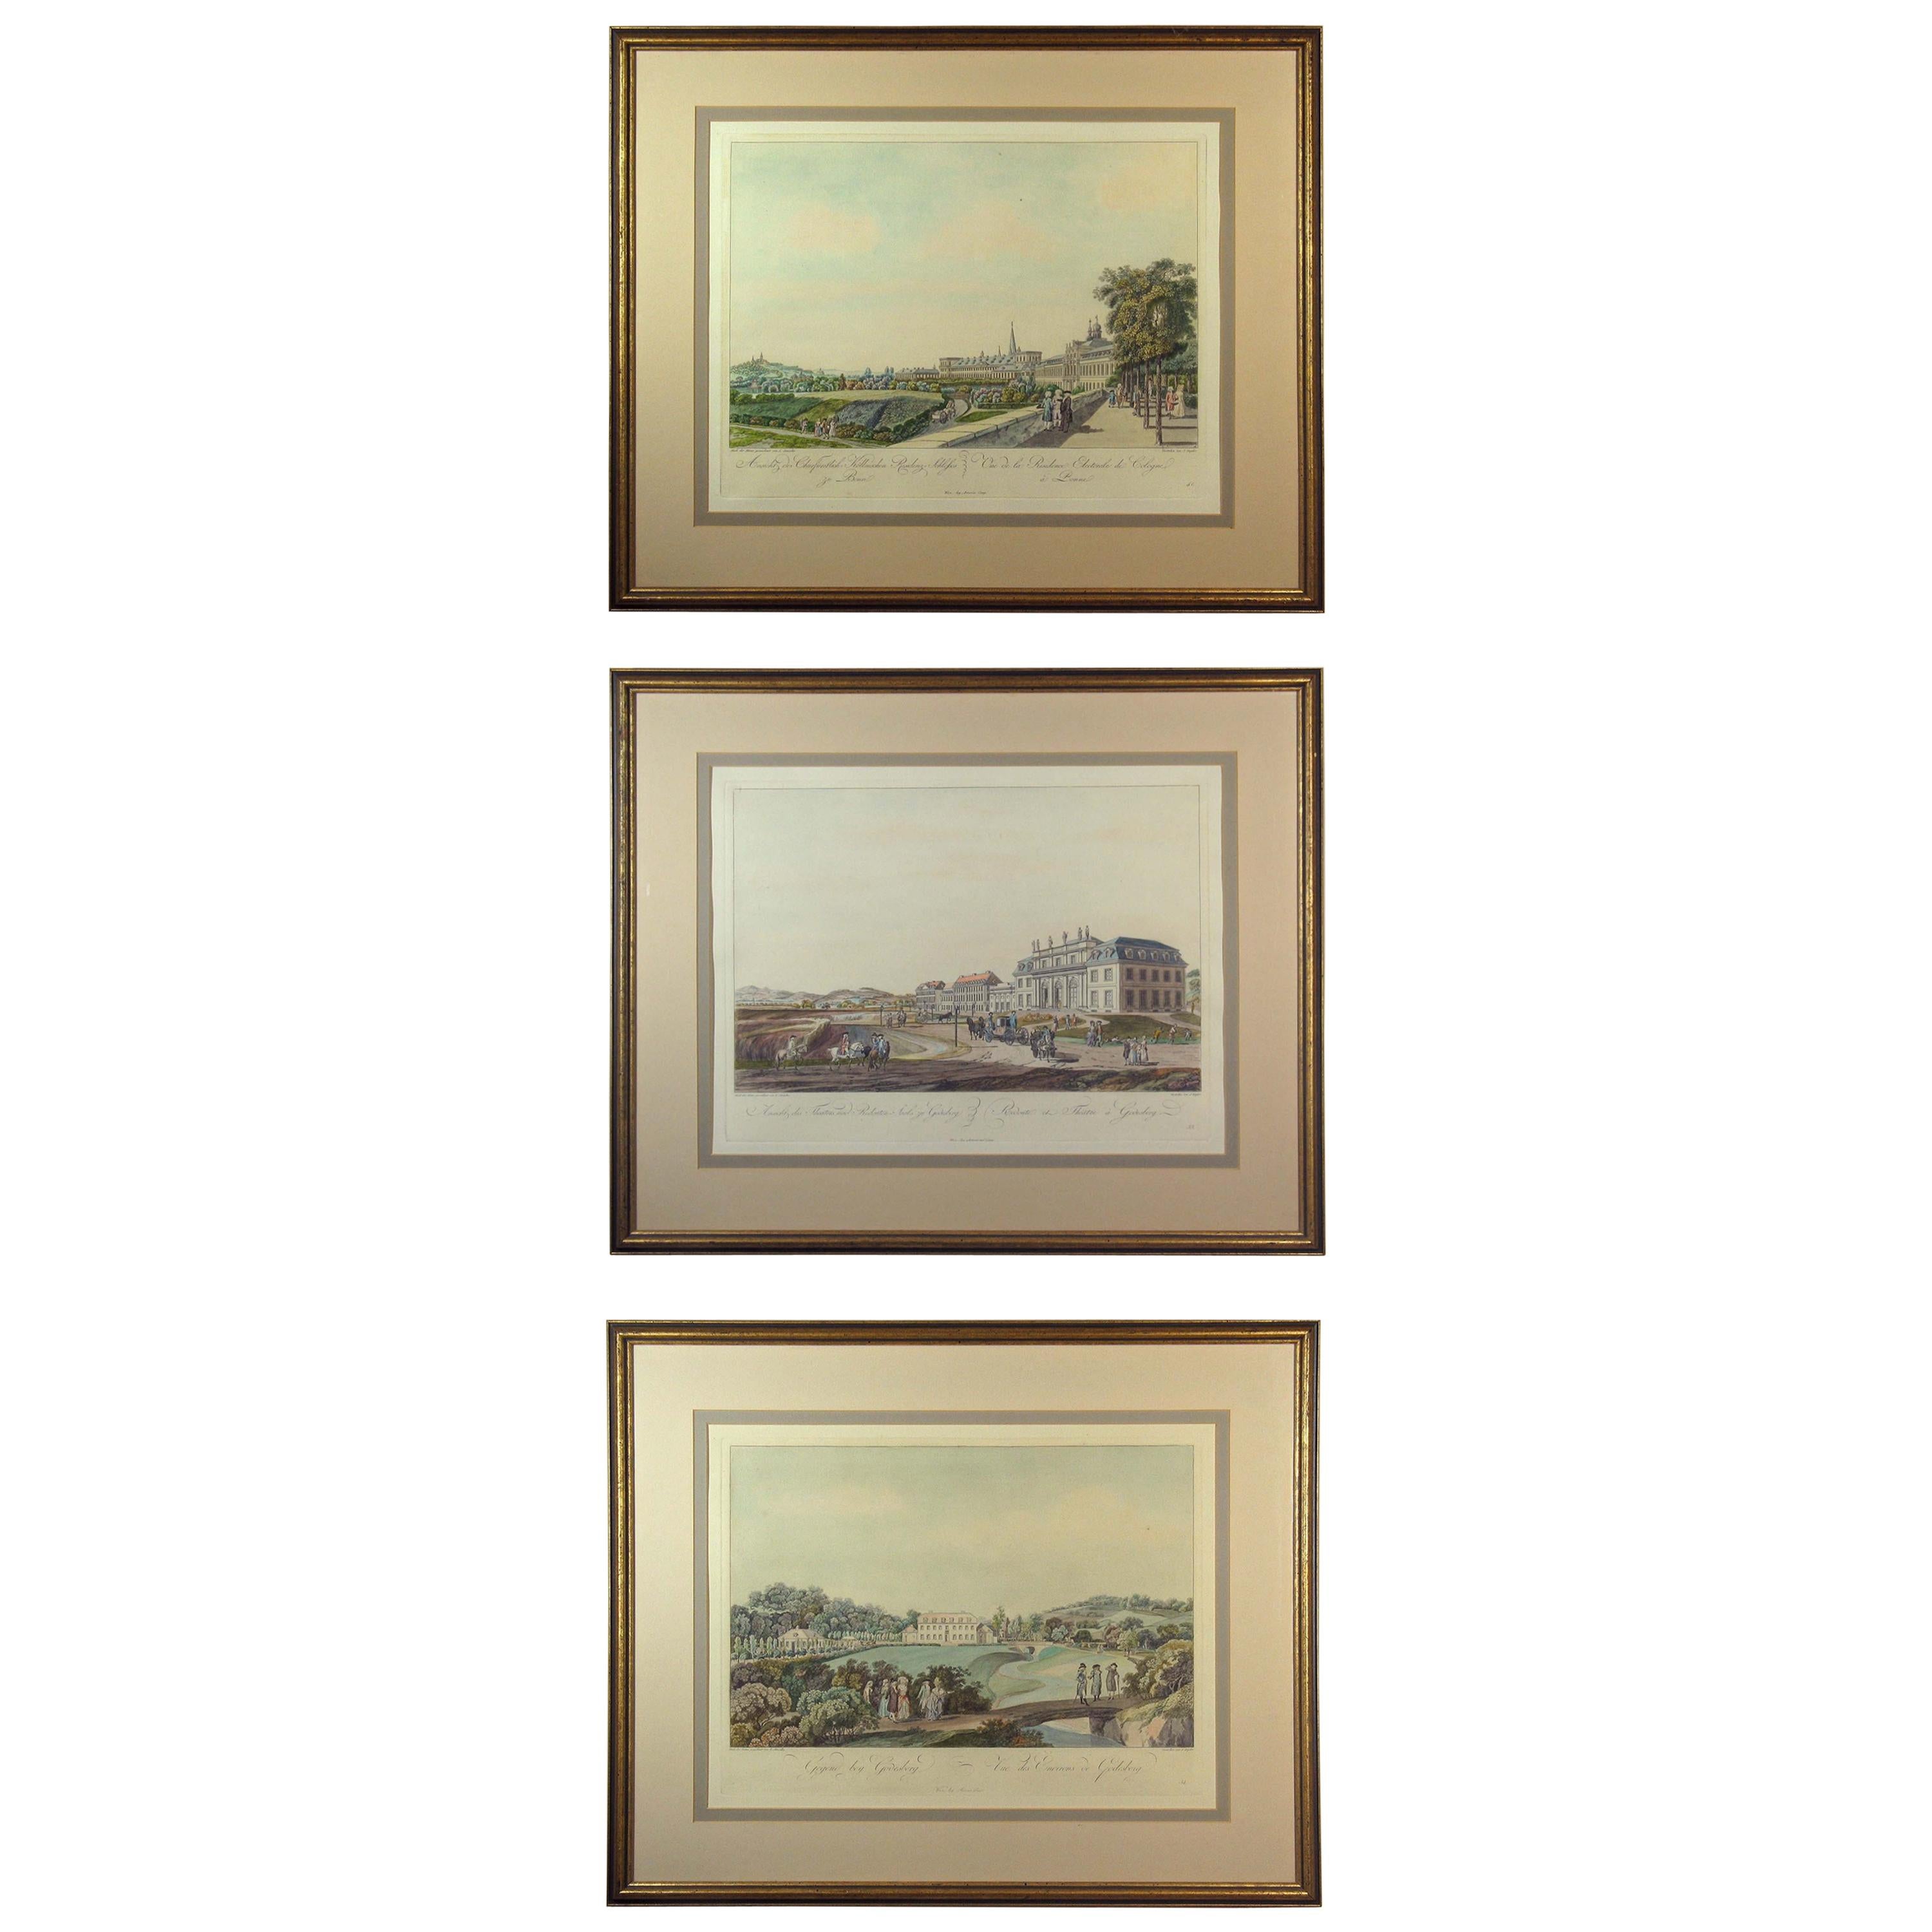 Lot of Three Framed Decorative Hand Colored Topographical Etchings